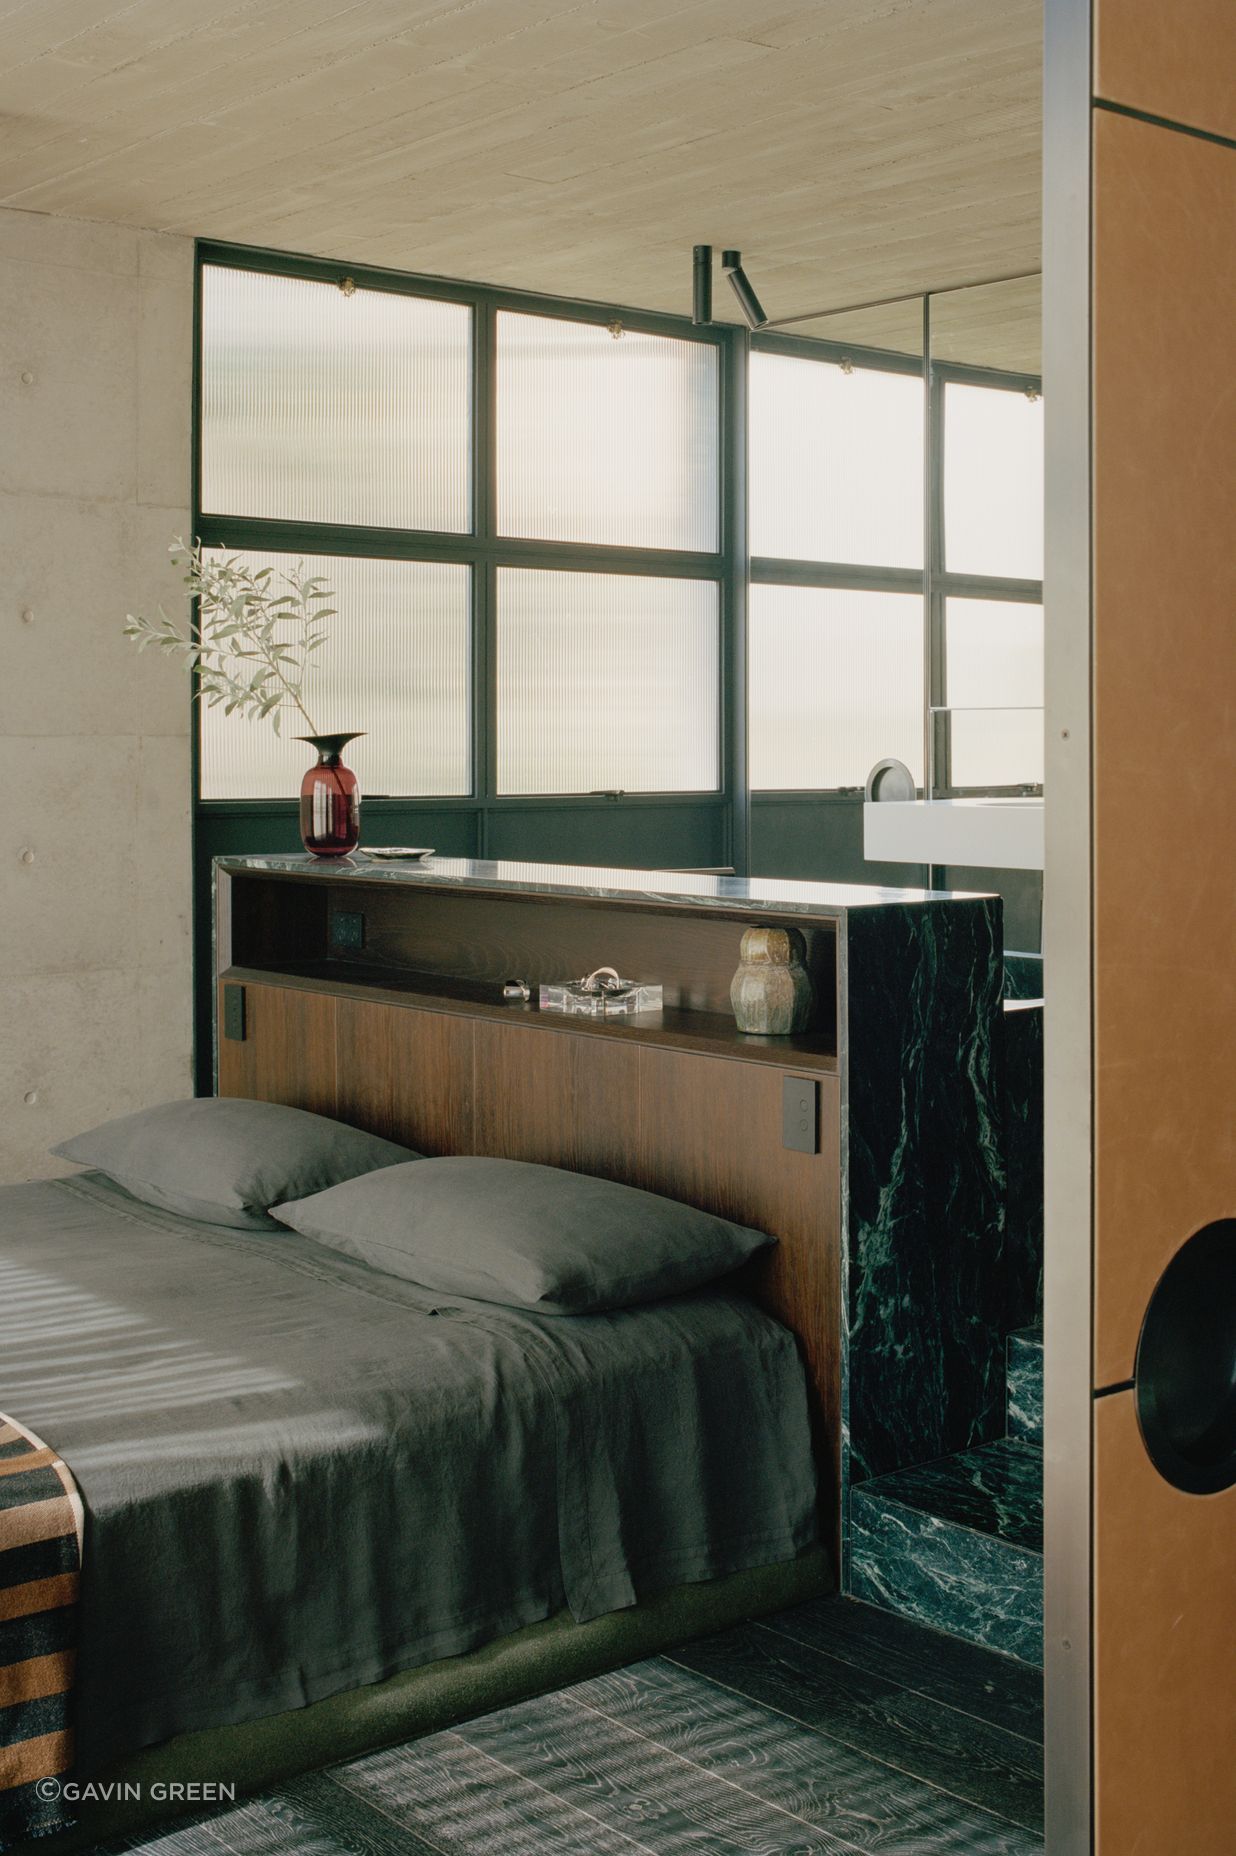 In the master bedroom, the bedhead is formed by the back of the marble bath.